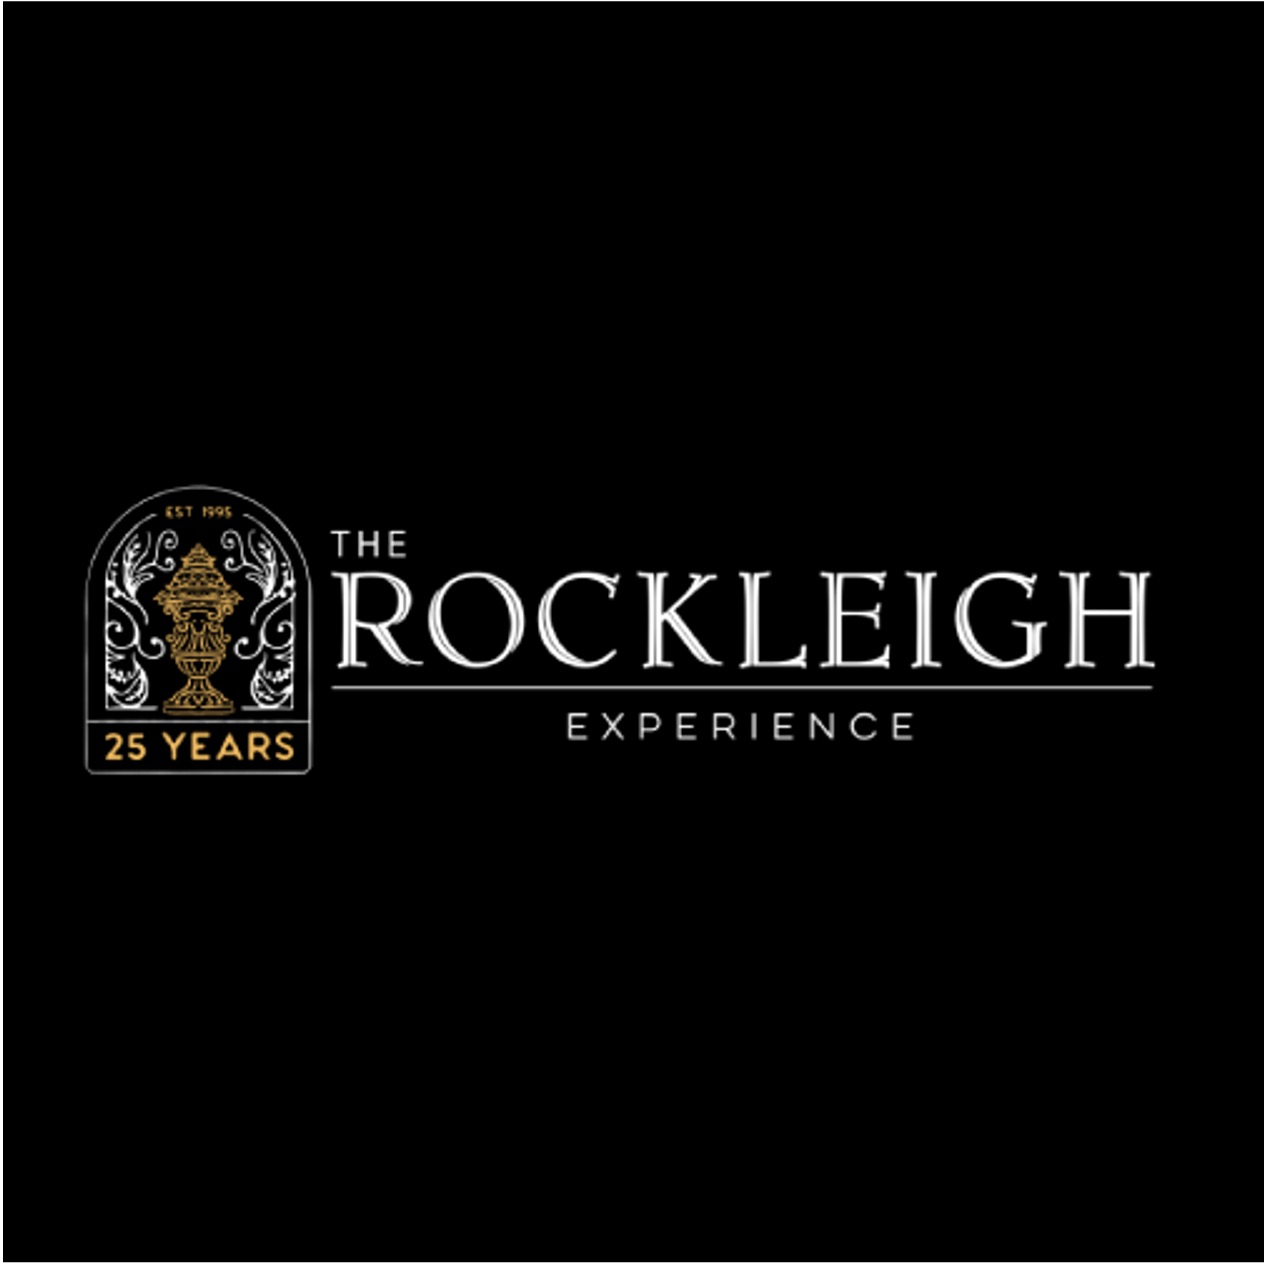 The Rockleigh